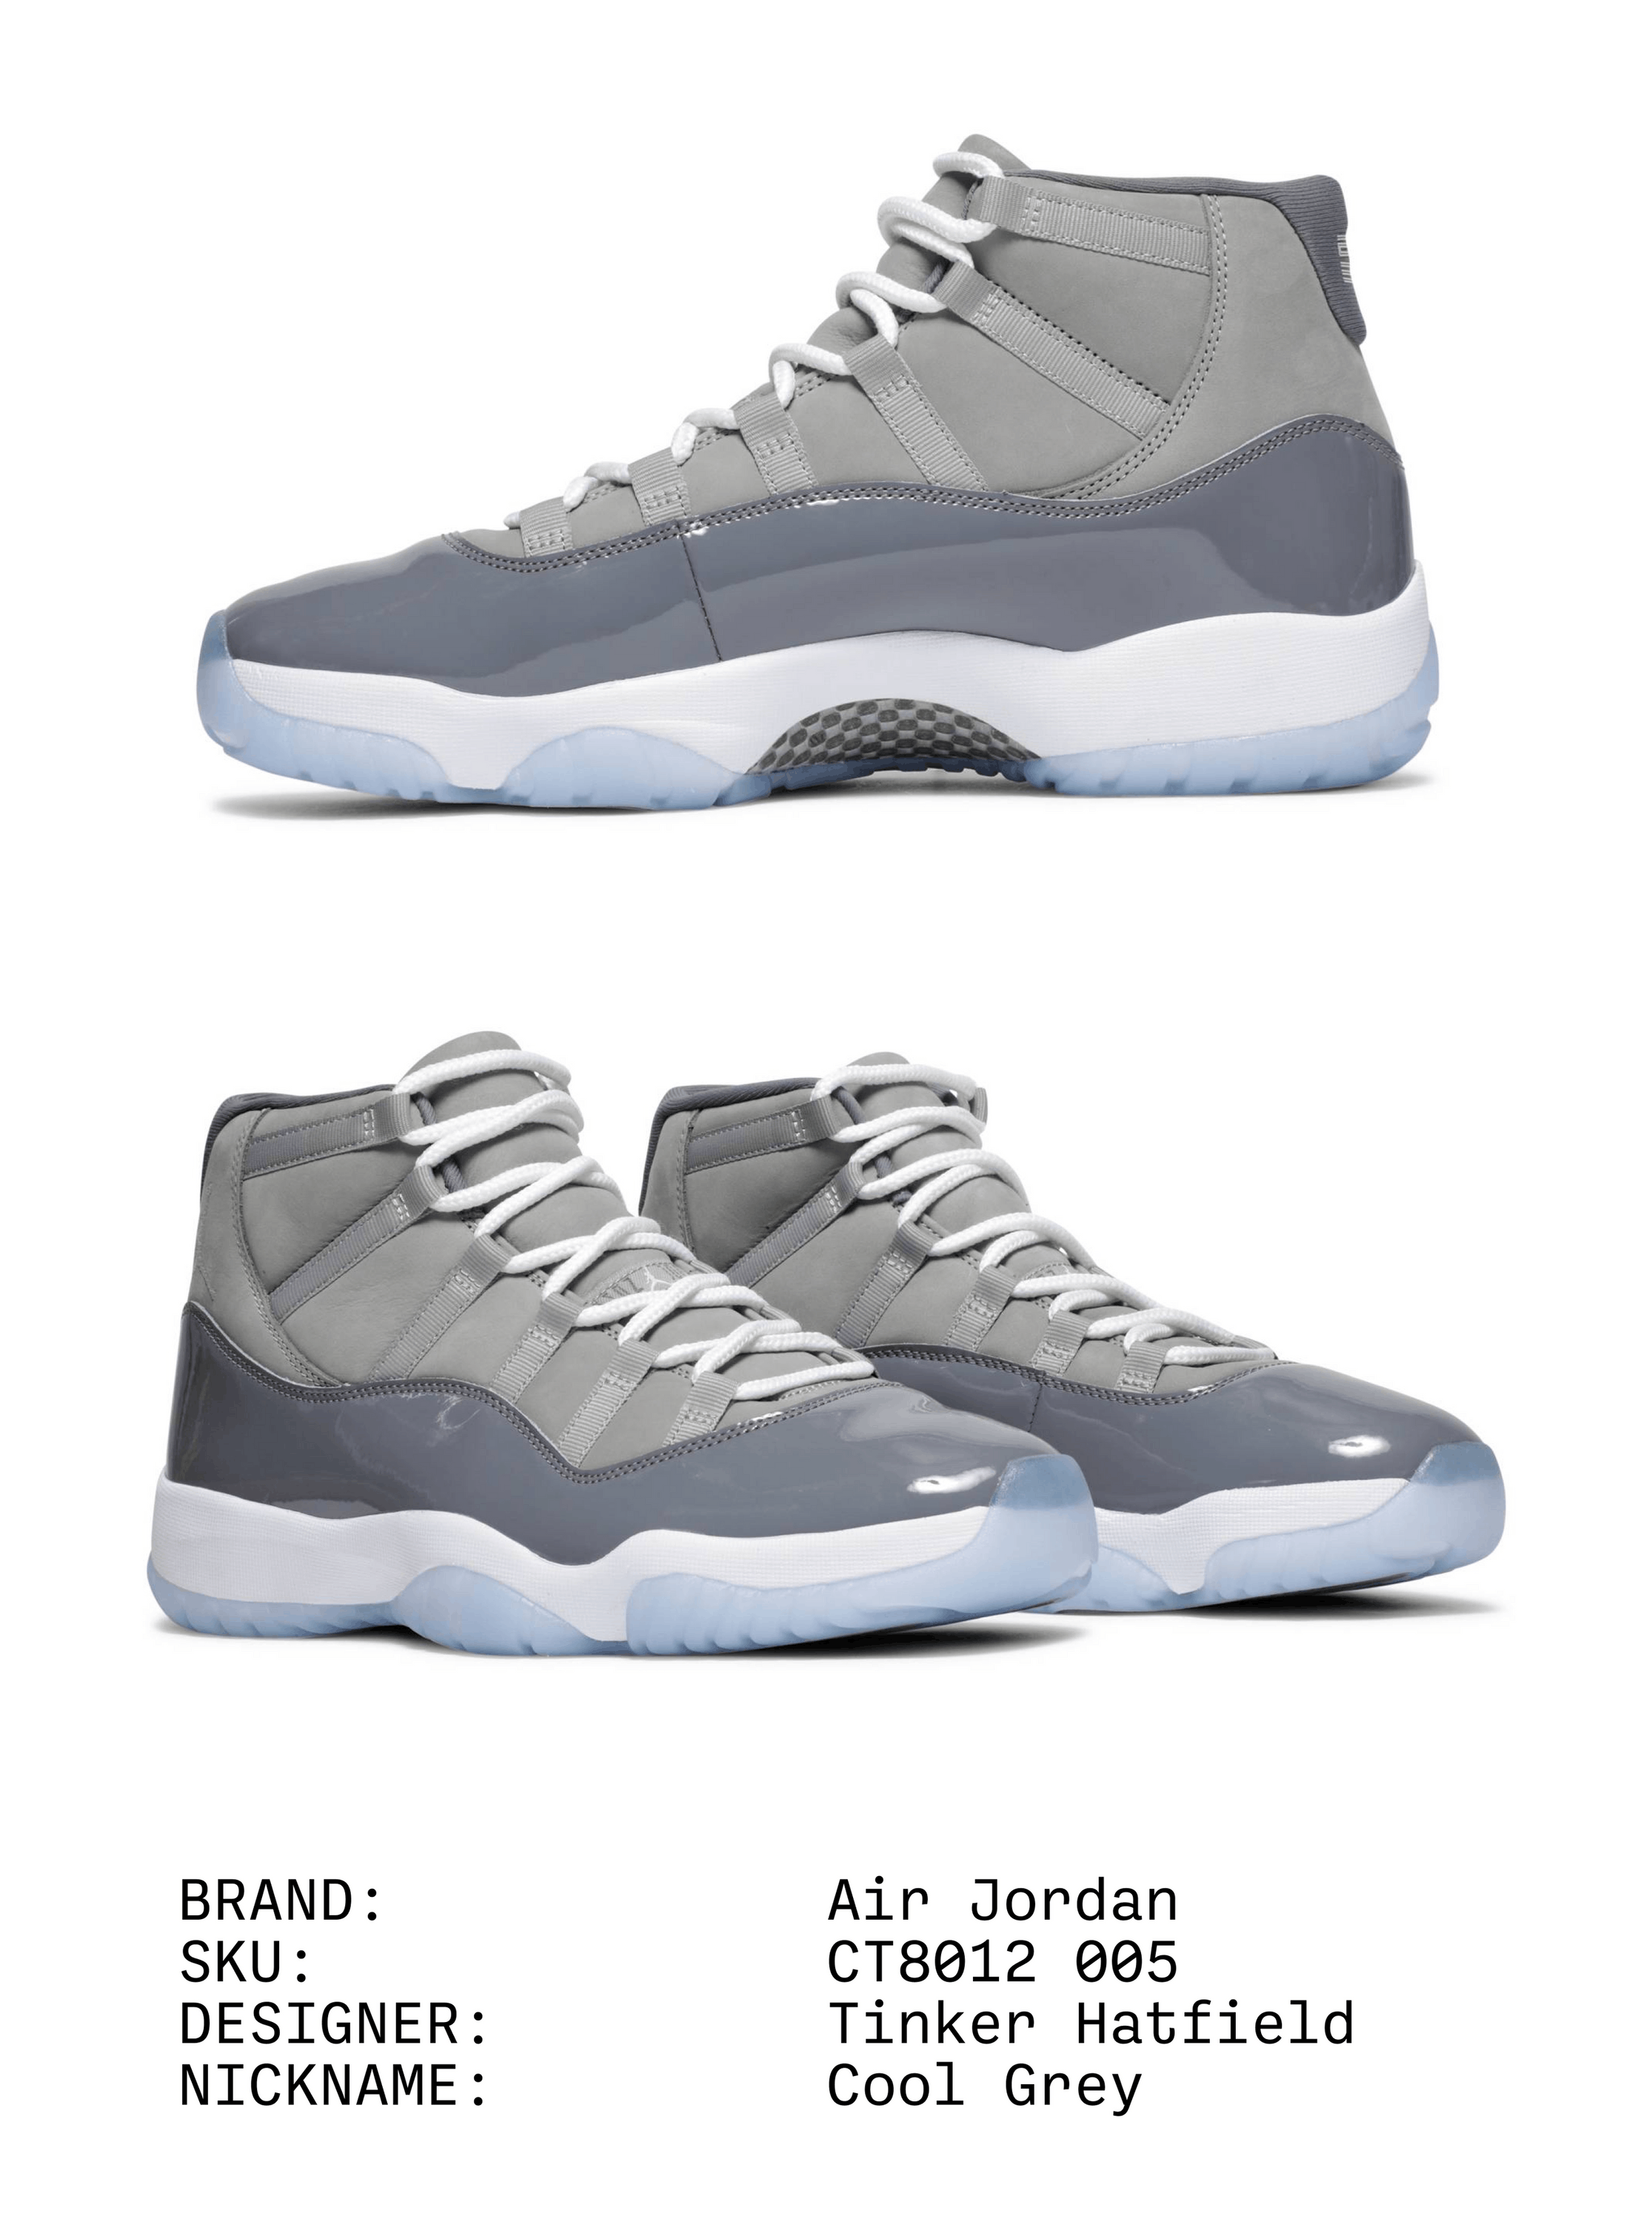 How Nike's Air Jordan 11 Cool Grey exposed a $85 million alleged